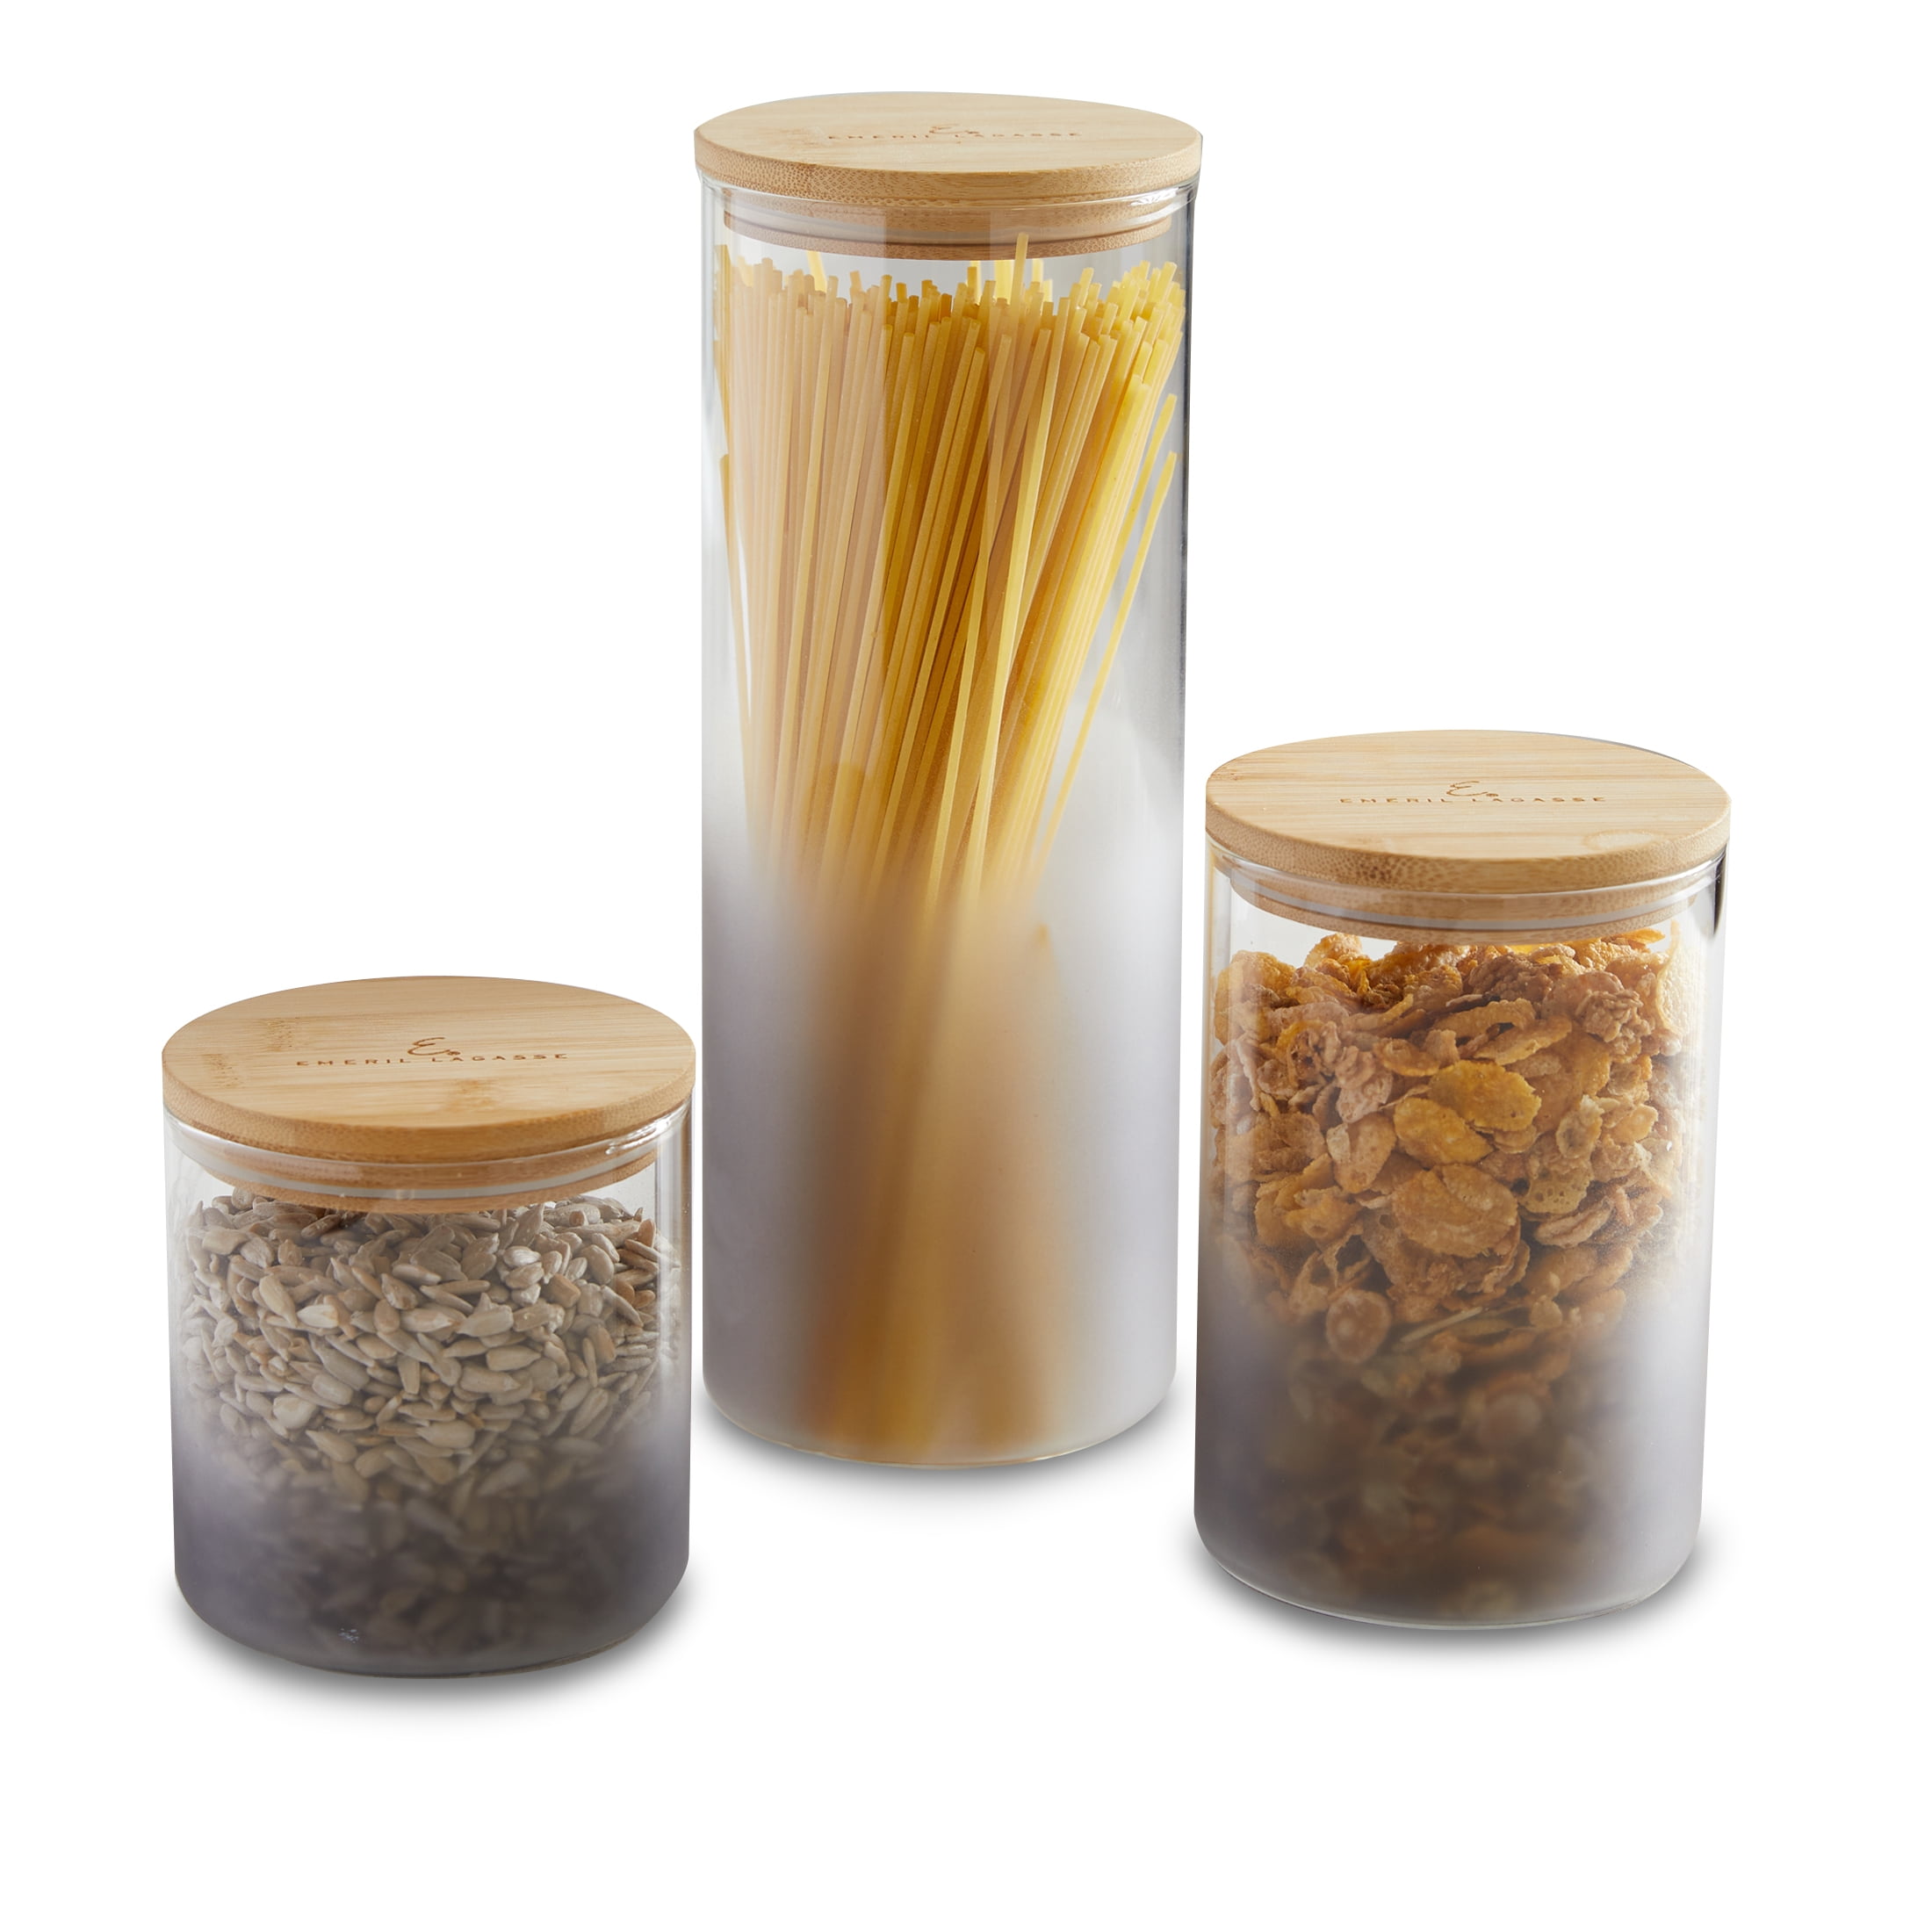 Wholesale Multifunctional Glass Food Storage Jars Airtight Lid Manufacturer  and Supplier